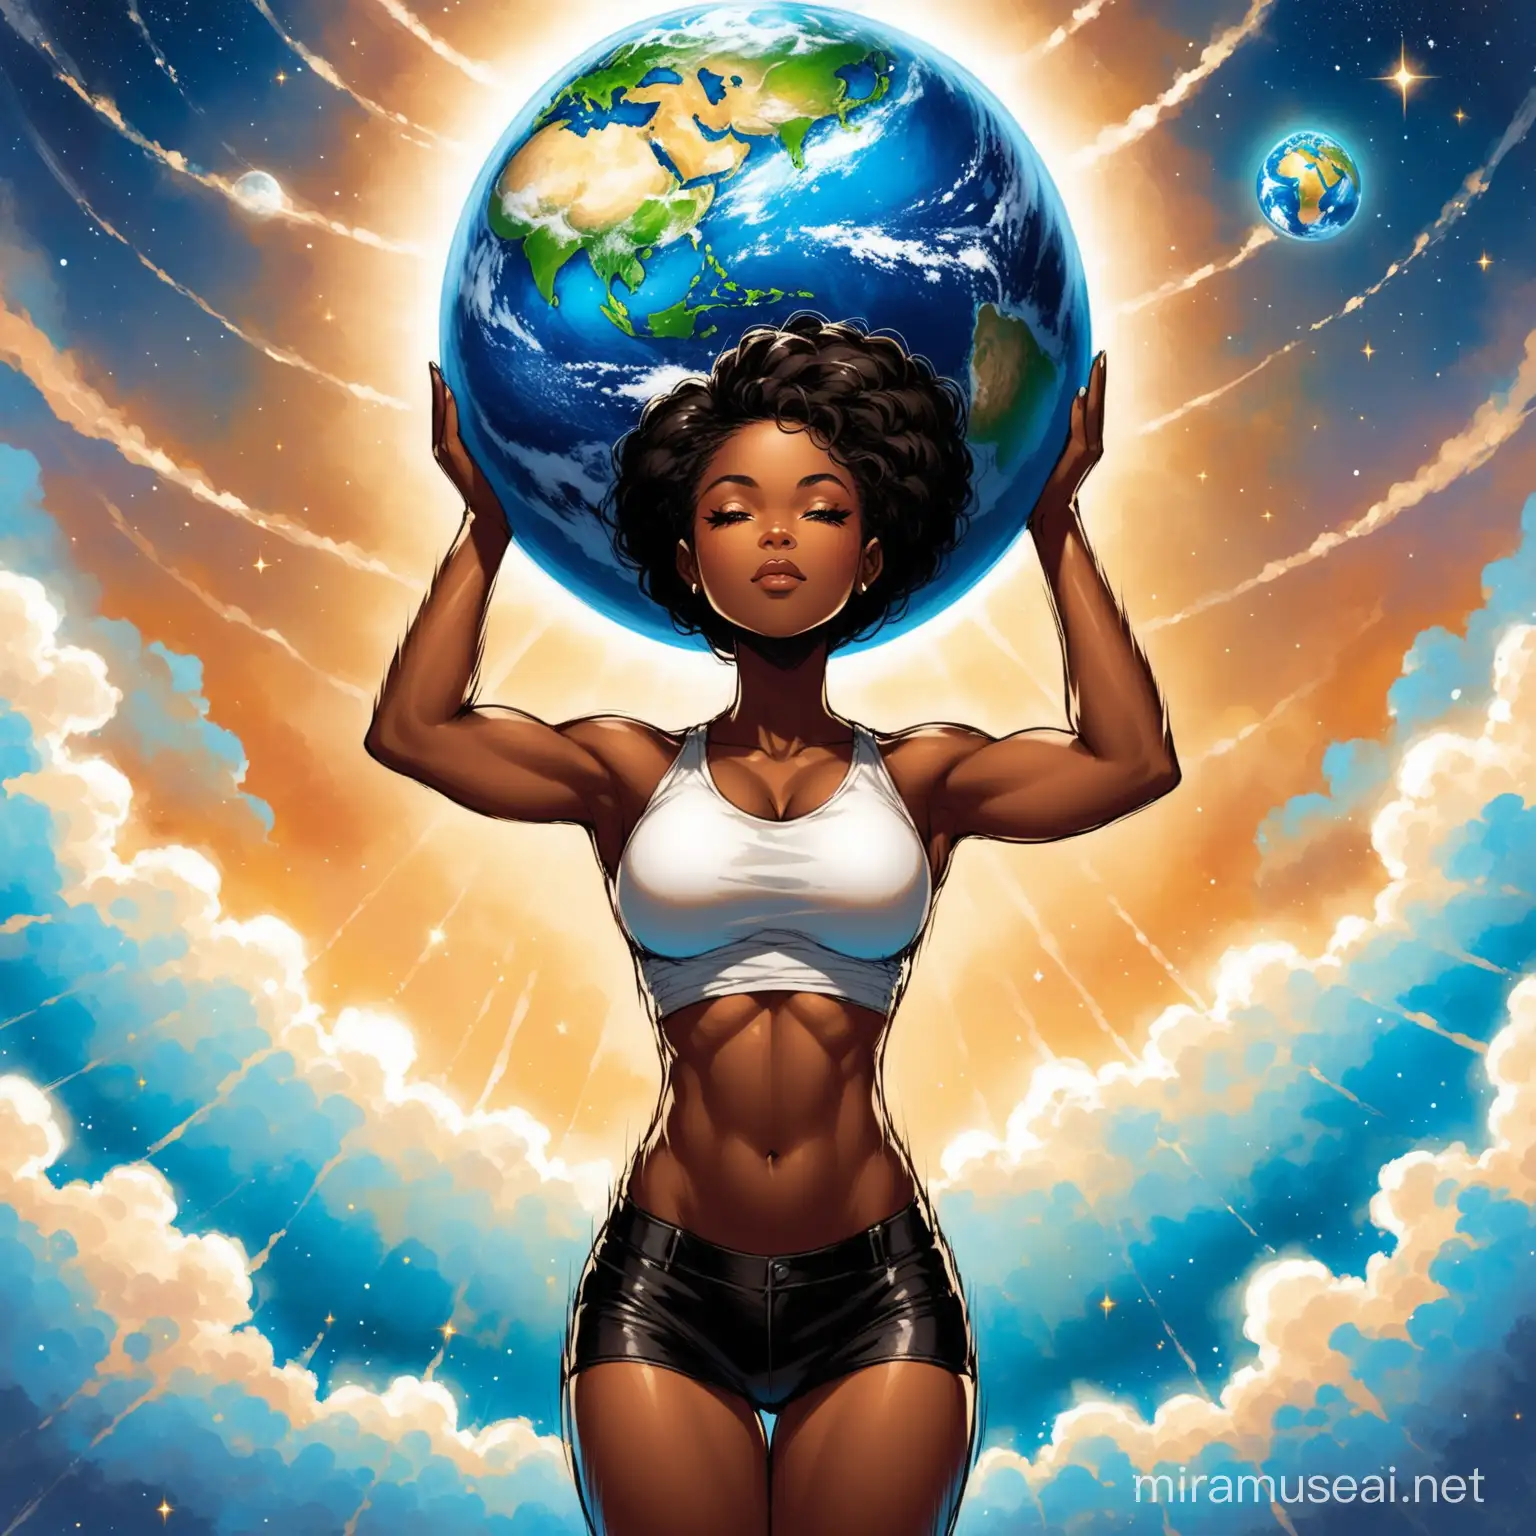 black woman showing shes strong holding the world on her shoulders  do not add a blue earth. but make it look like shes lifting the world above her head
